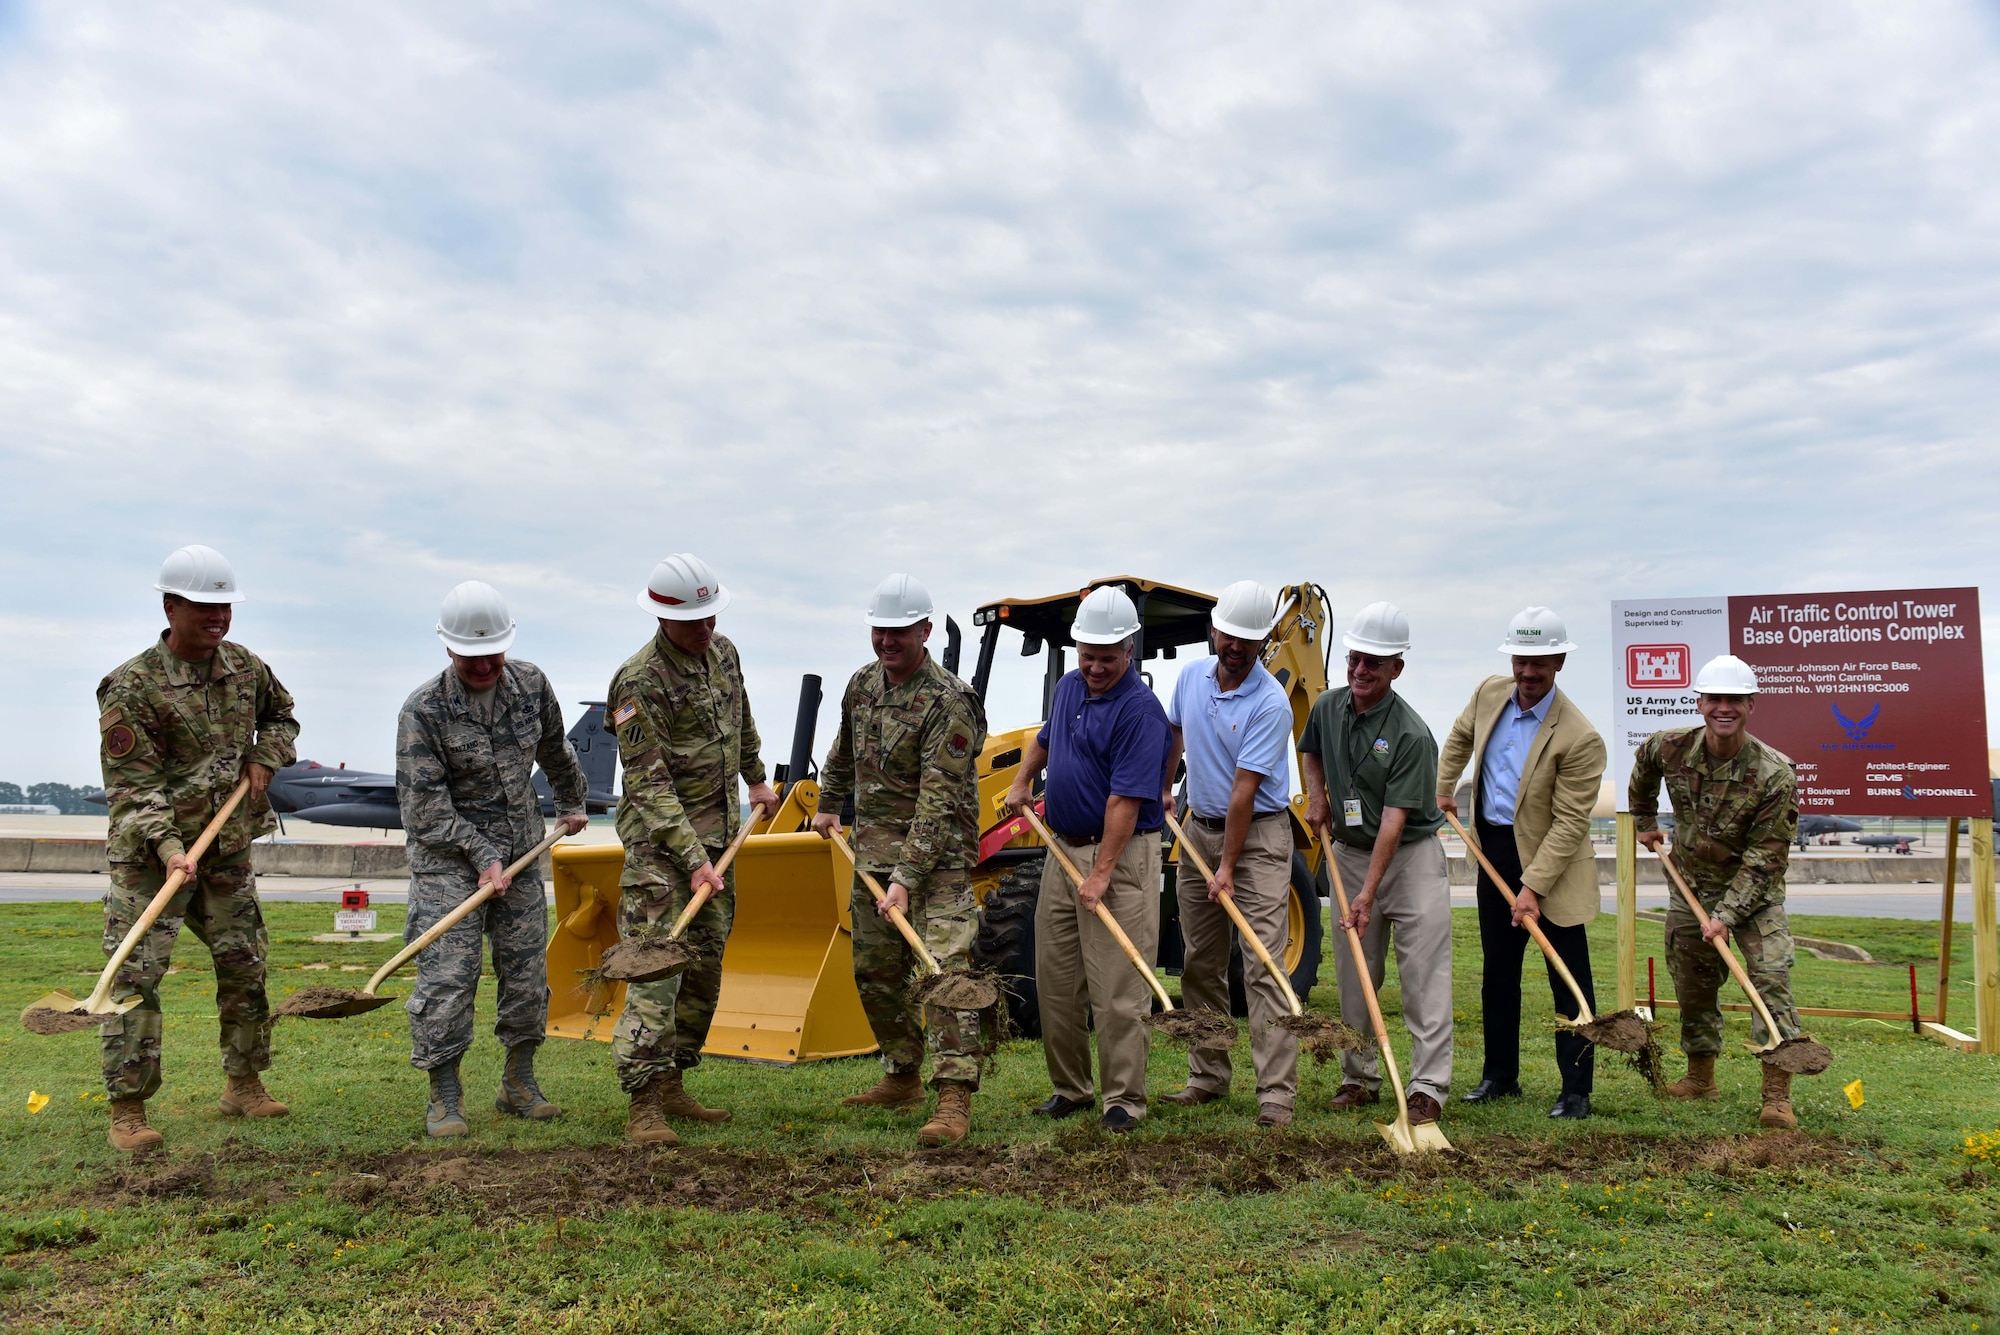 4th Fighter Wing leadership, a United States Army Corps of Engineering representative and members of the community complete the ceremonial groundbreaking during the 4FW Air Traffic Control Tower and Base Operations Complex groundbreaking ceremony Aug. 15, 2019, at Seymour Johnson Air Force Base, North Carolina.